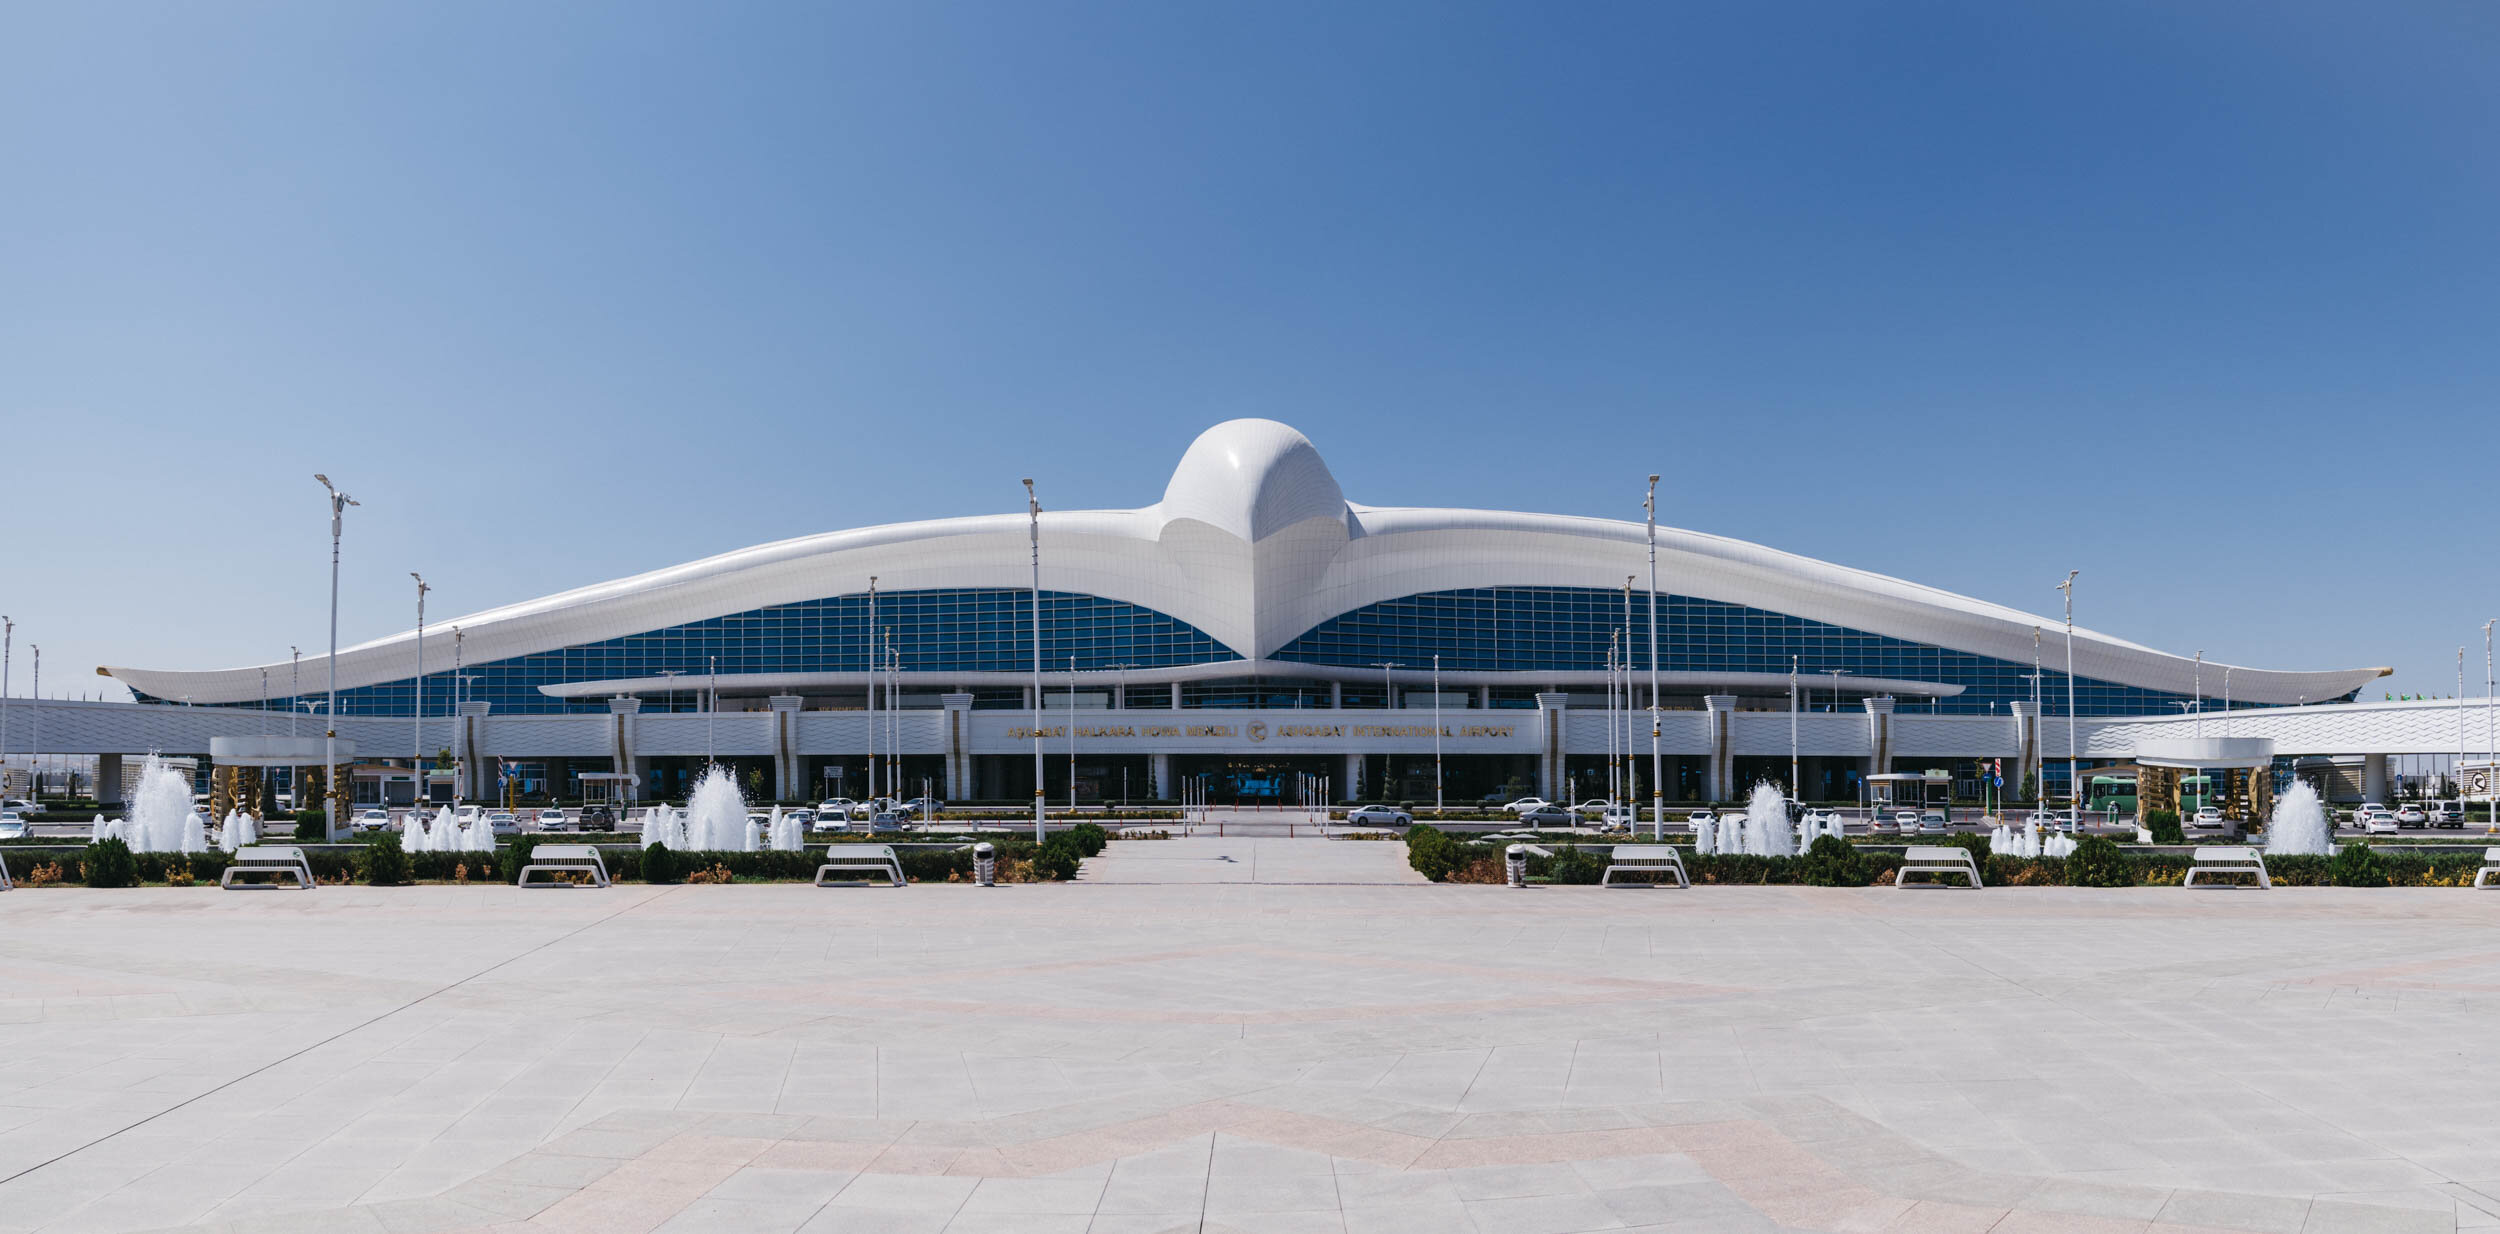  The international airport. Several of the more important buildings in Ashgabat are designed in the shape of something that resembles their function or purpose. 